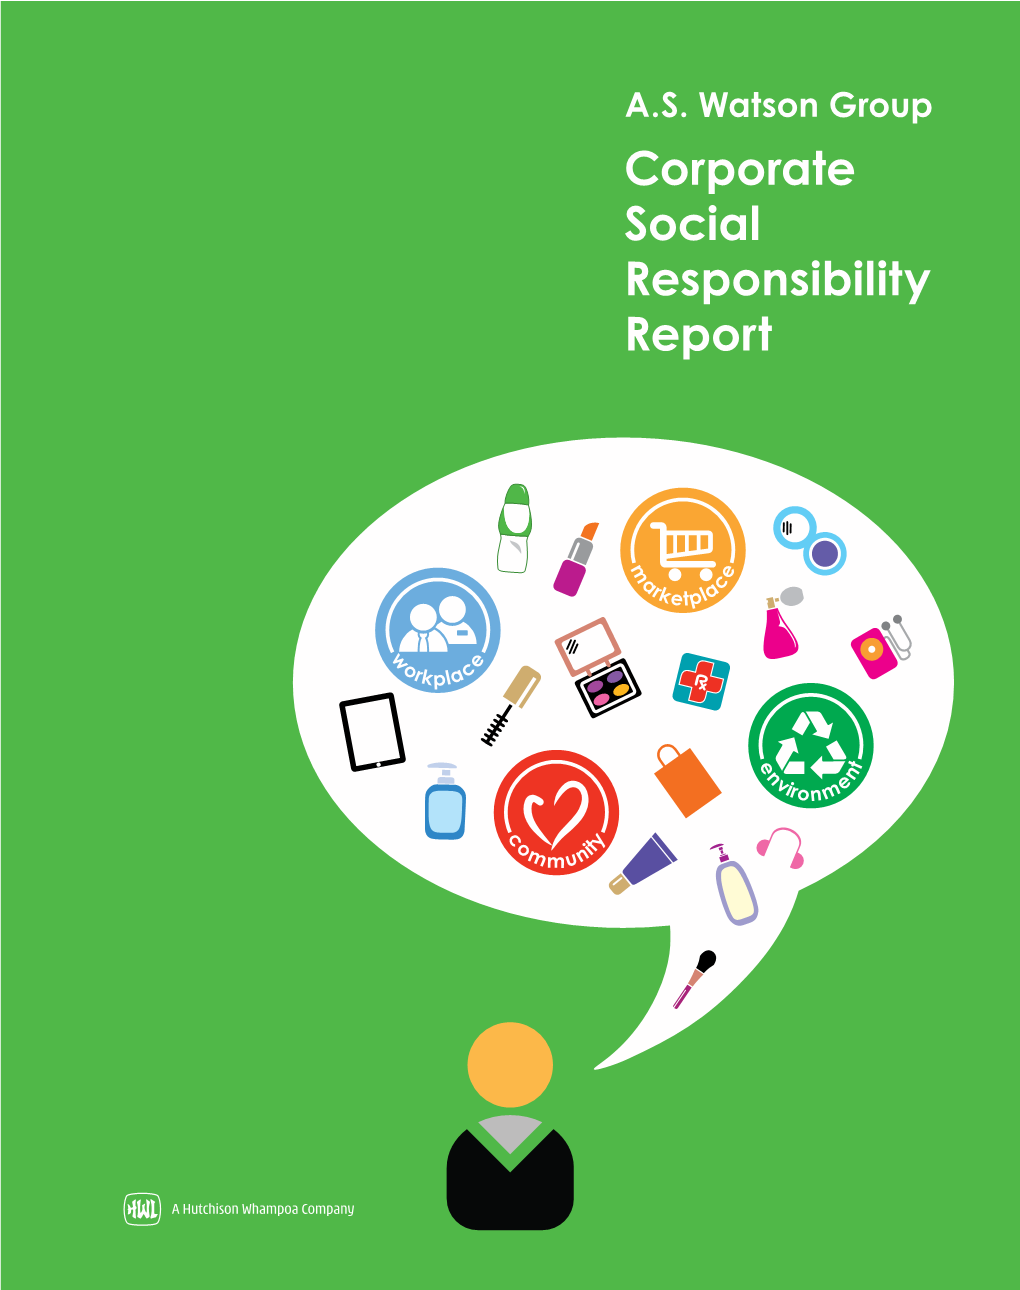 37 A.S. Watson Group Corporate Social Responsibility Report